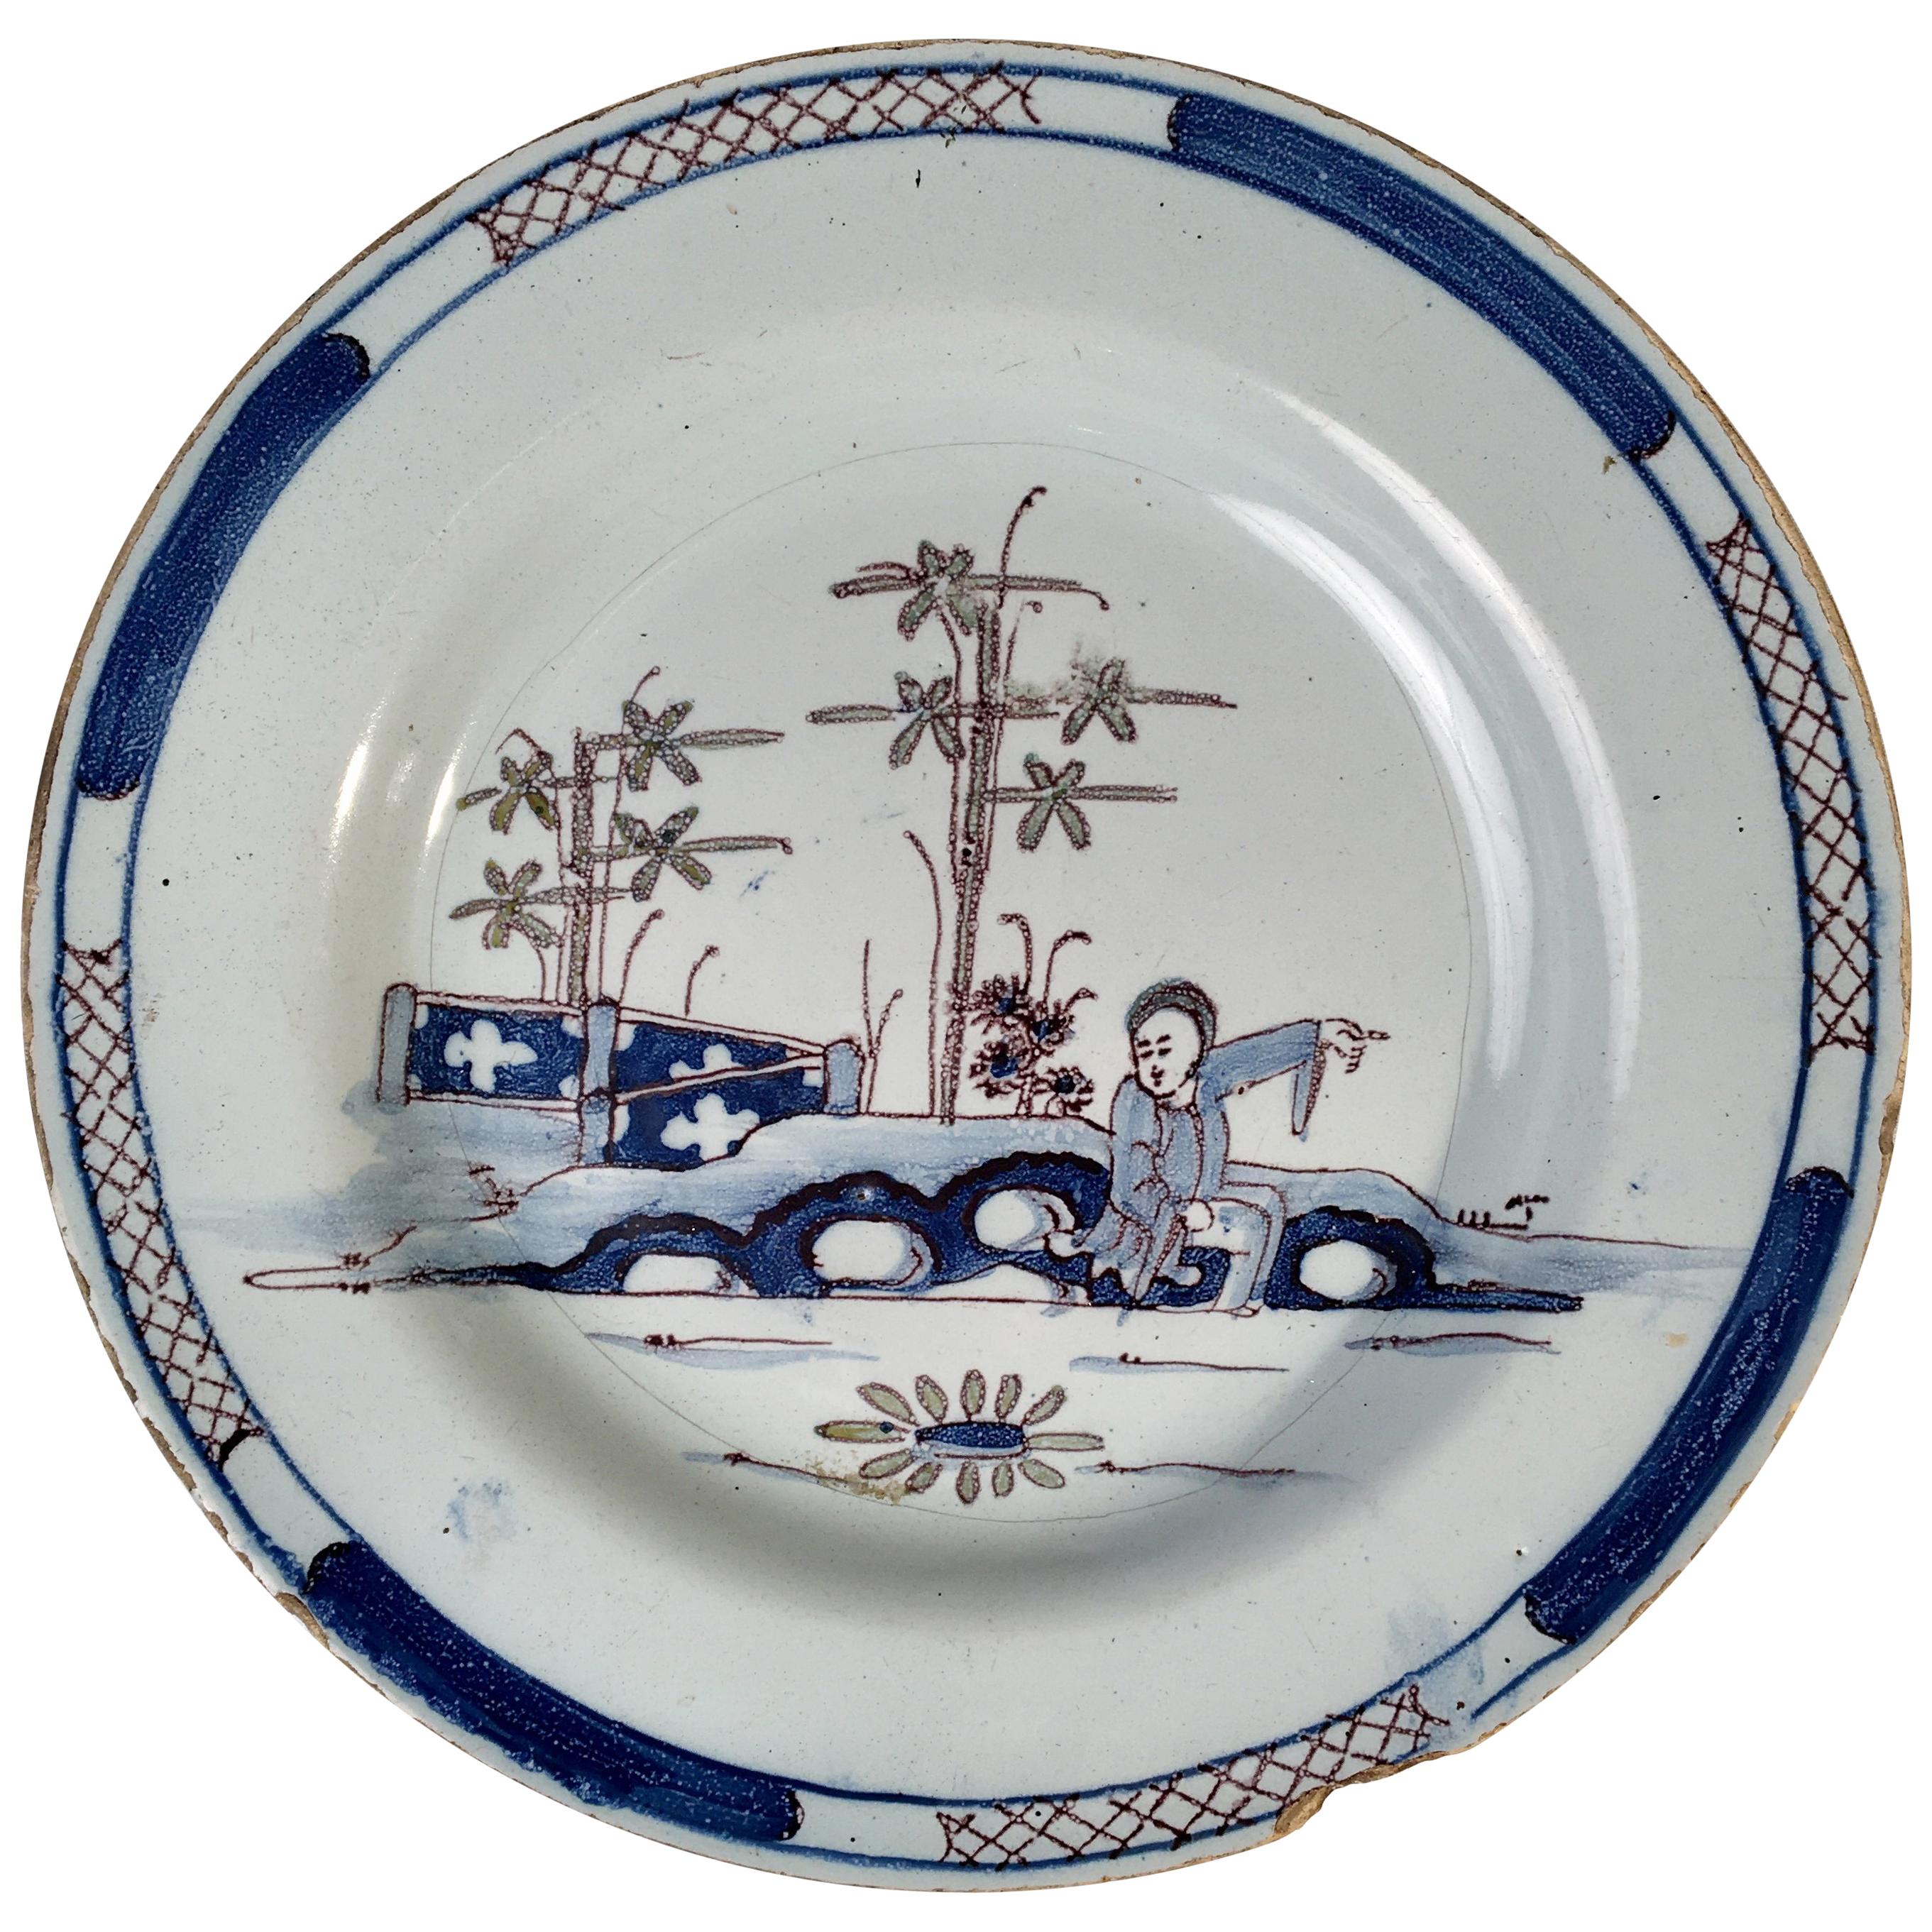 Delft Plate in the Chinese Style, 18th Century